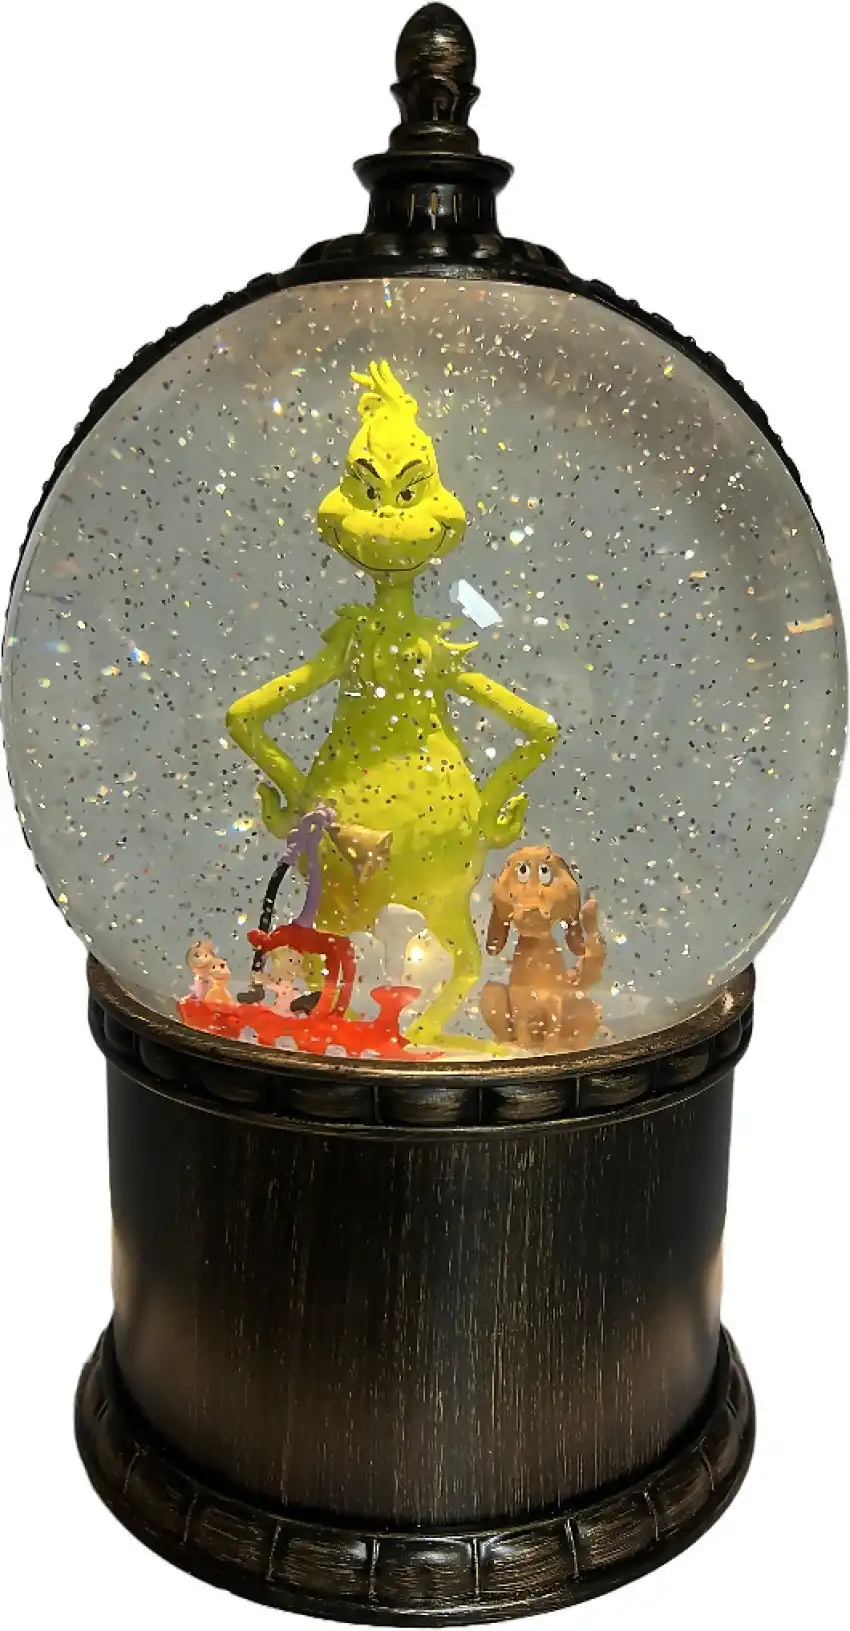 Cotton Candy - Xmas Grinch Snowglobe With Max And Train - Dr. Seuss